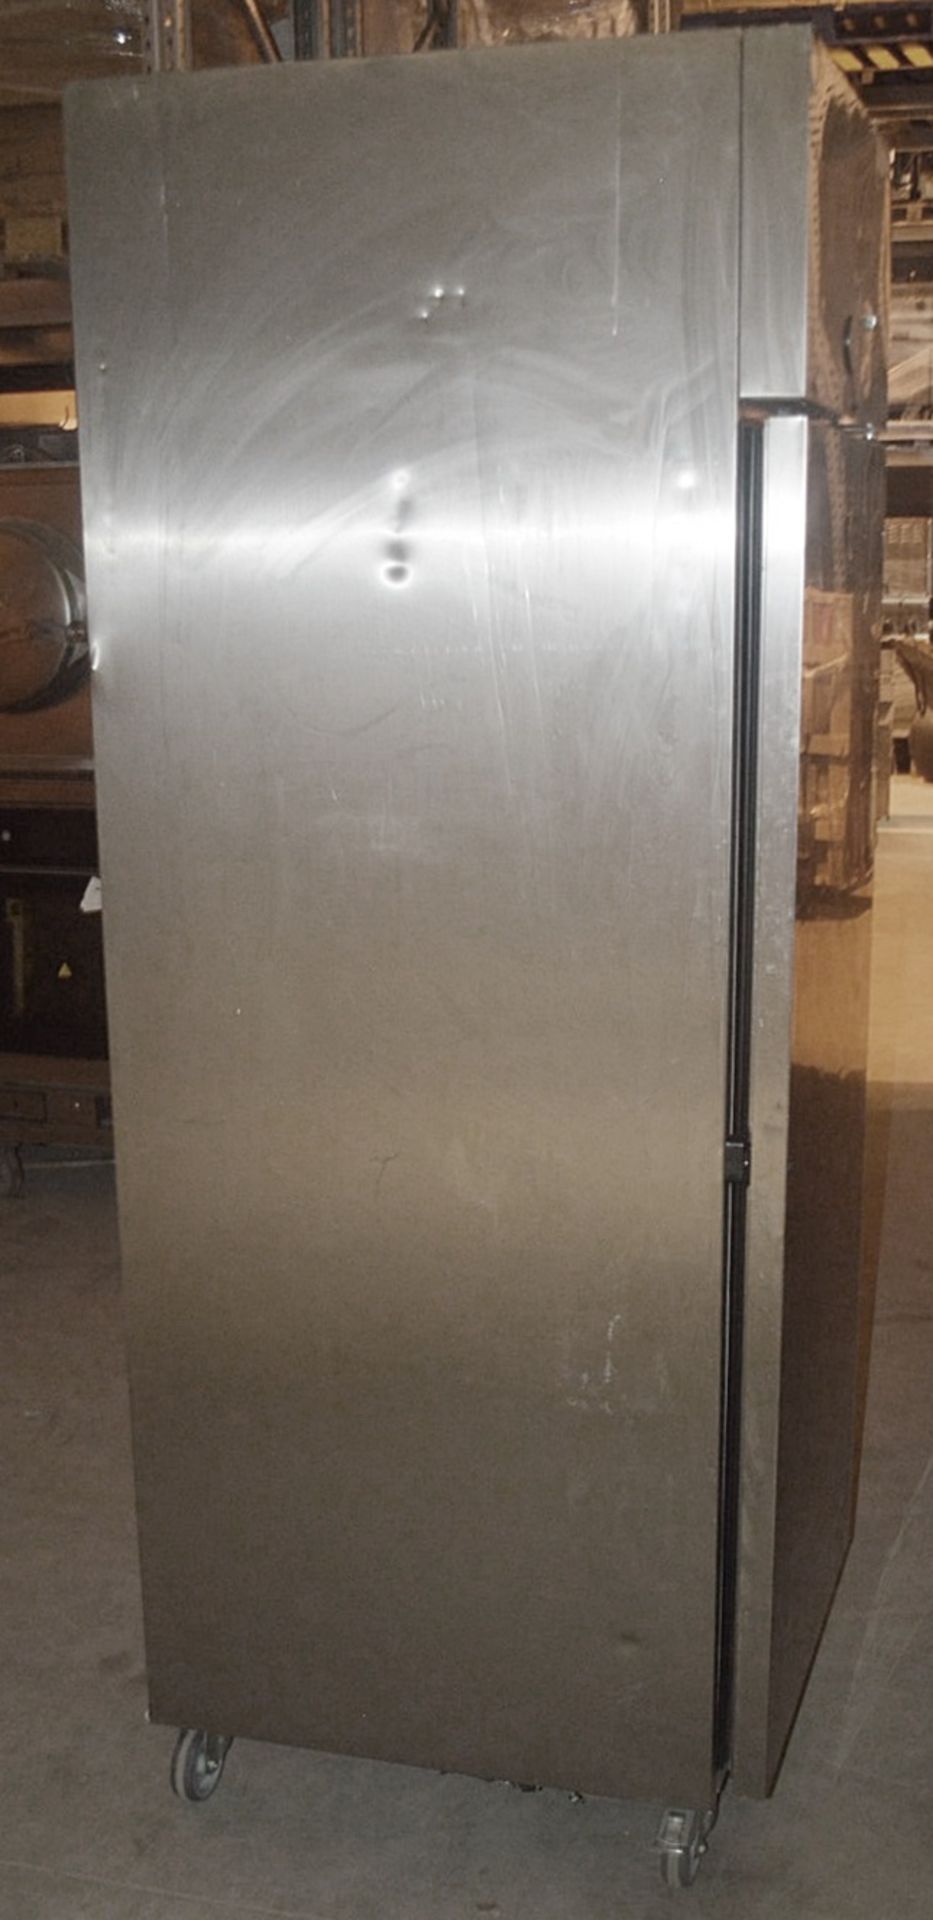 1 x FOSTER Stainless Steel Commercial Upright Freezer (PROG600L) - Dimensions: H208 x W70 x - Image 8 of 8